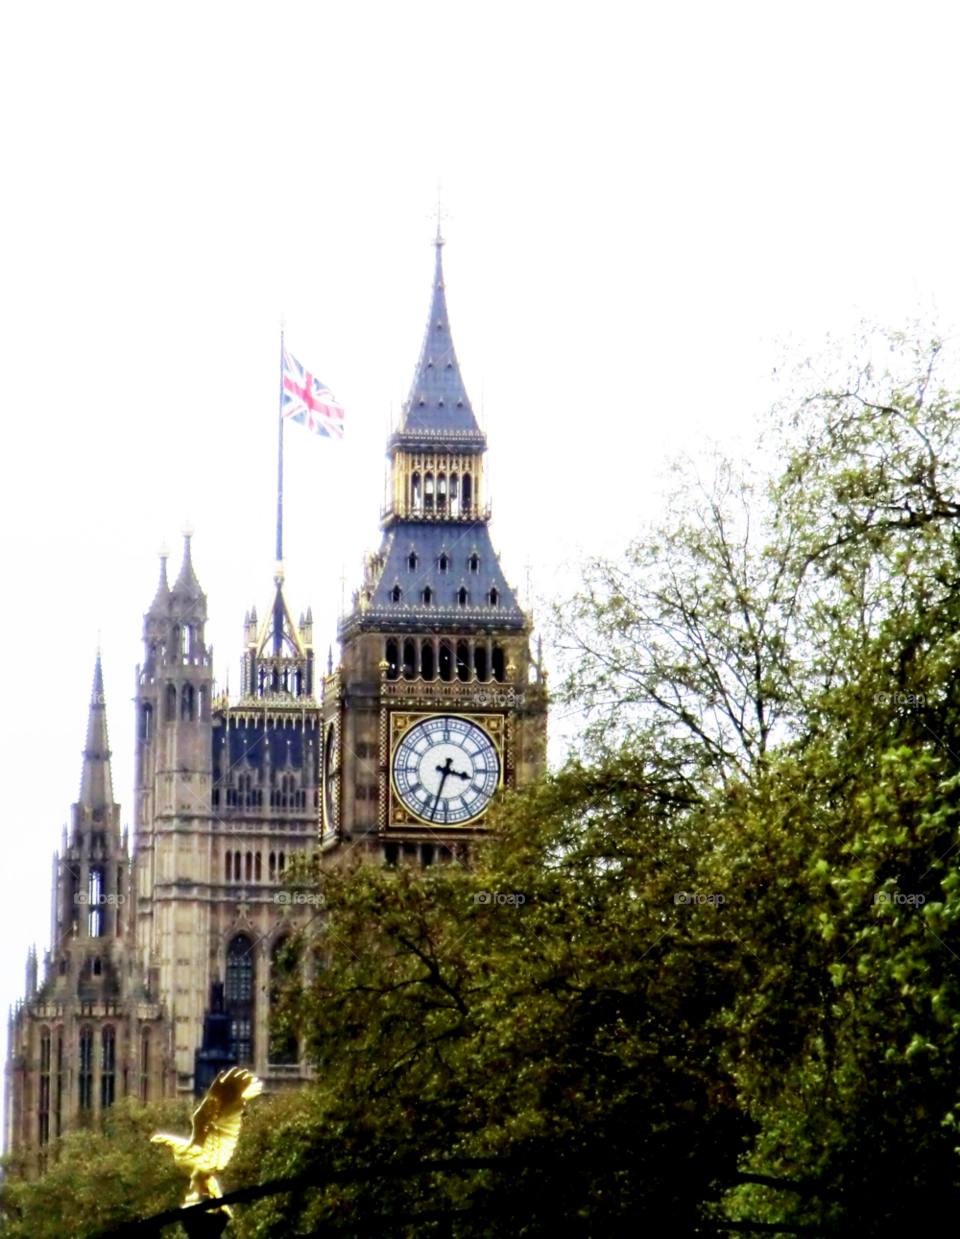 london bigben clock tower by cabday